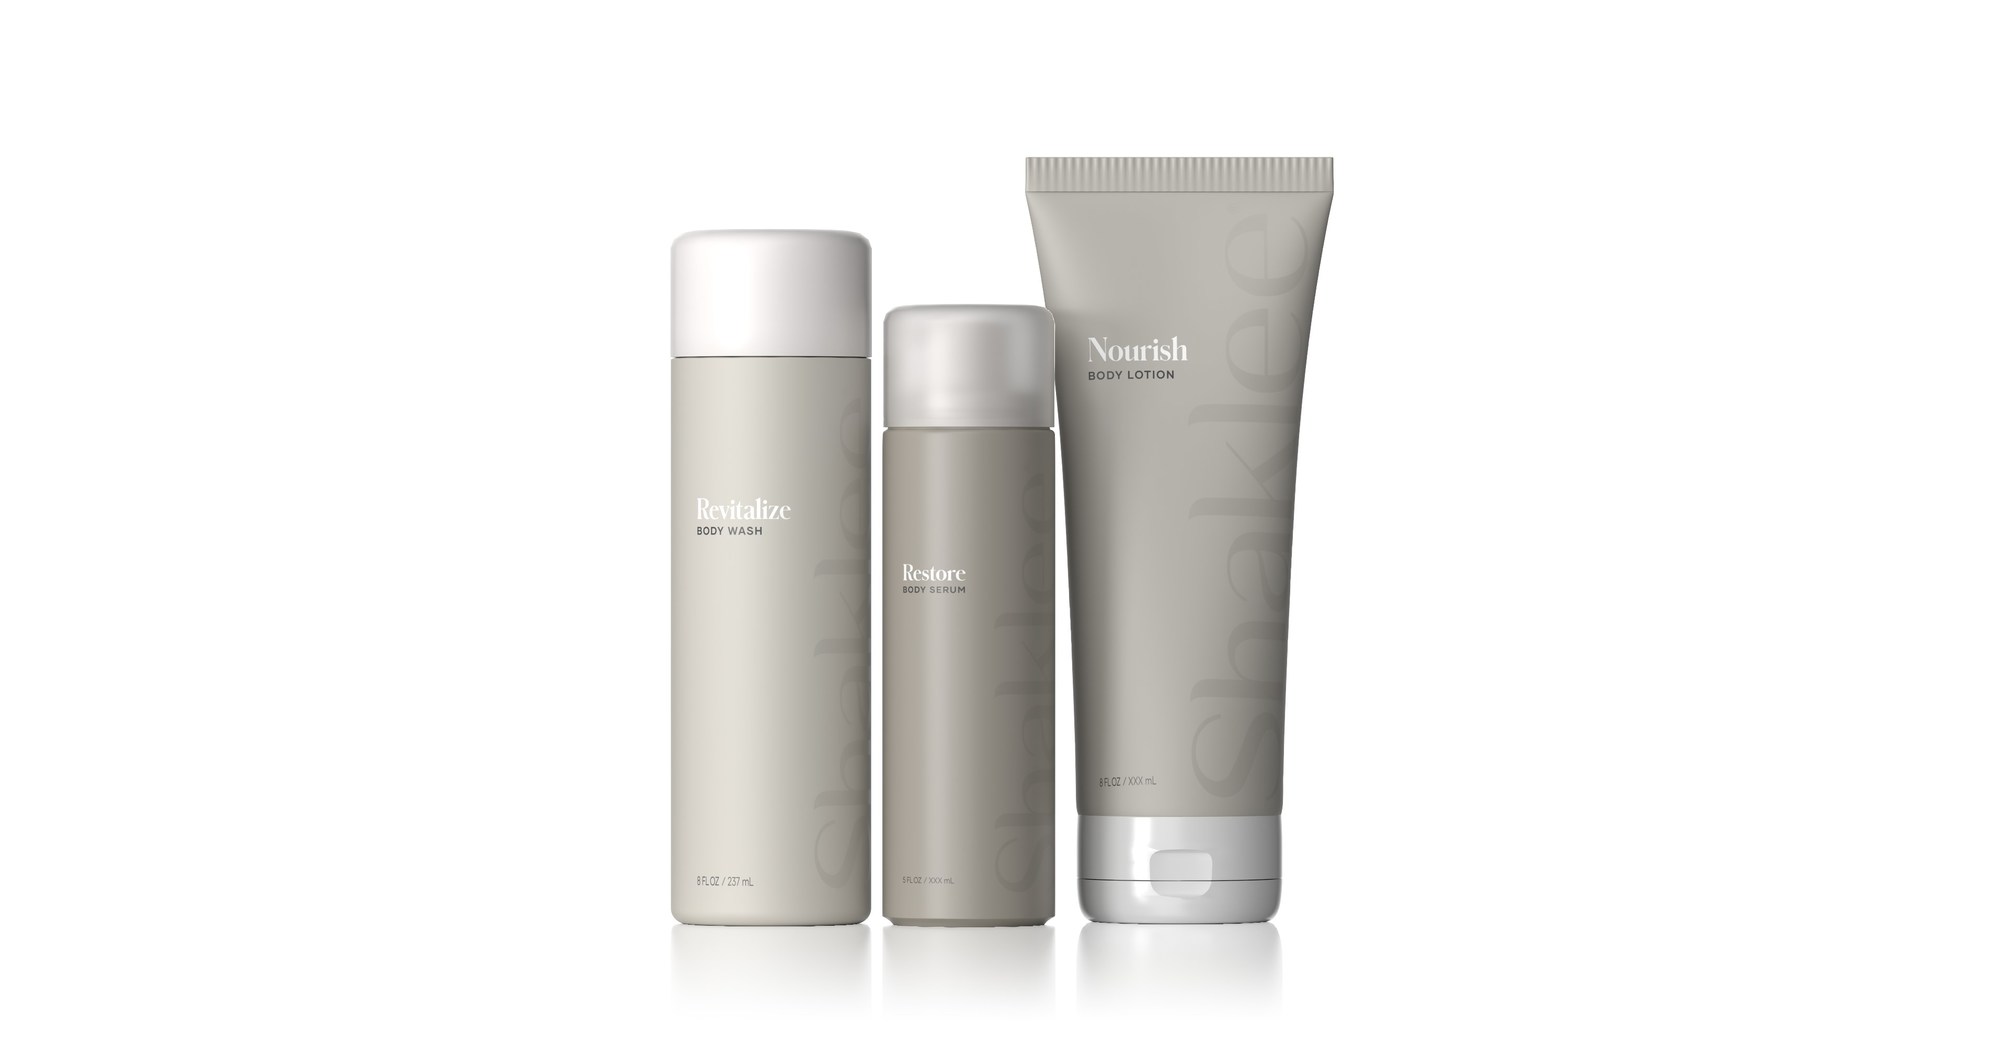 Shaklee Enters New Beauty & Wellness Category with Launch of Clean Anti-Aging Body Care Line